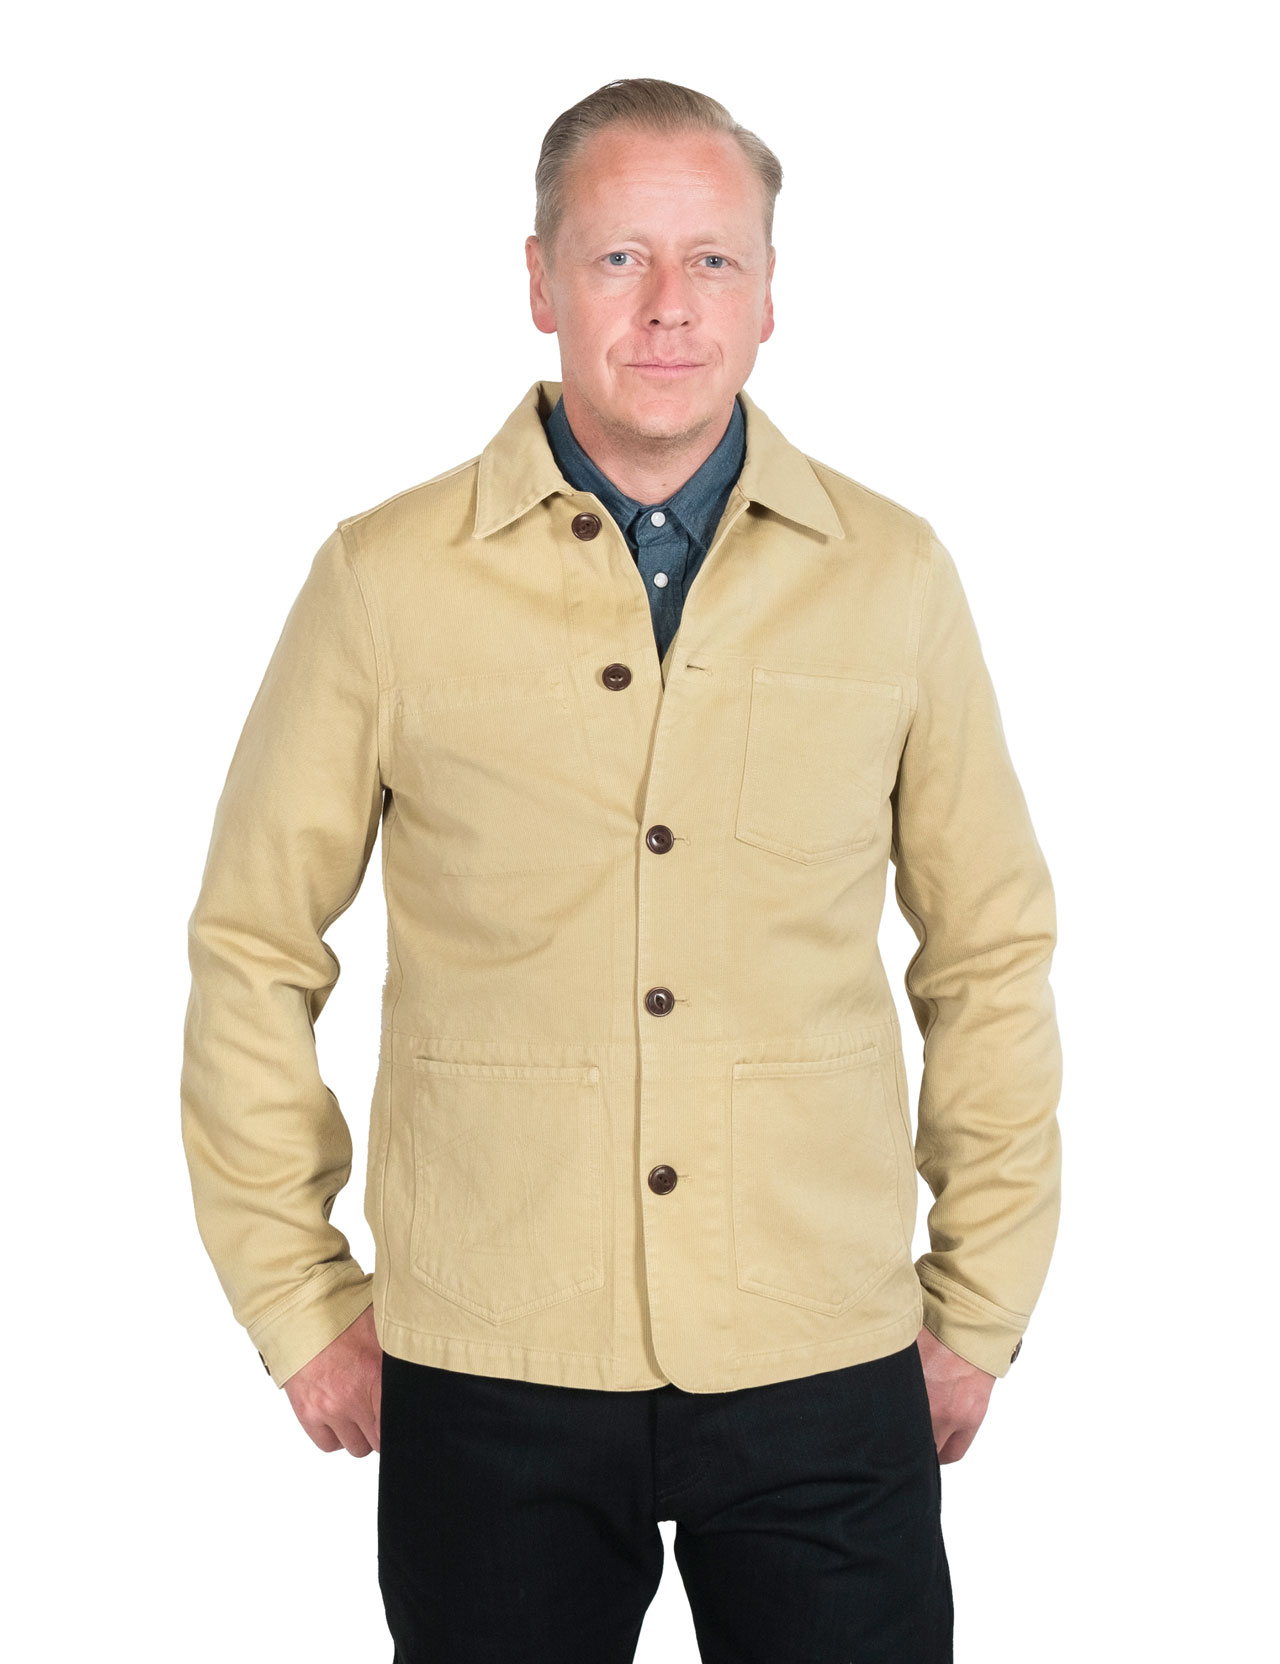 Eat Dust - Fit 673 Tropic Patsan Bedford Cord - Olive Grey